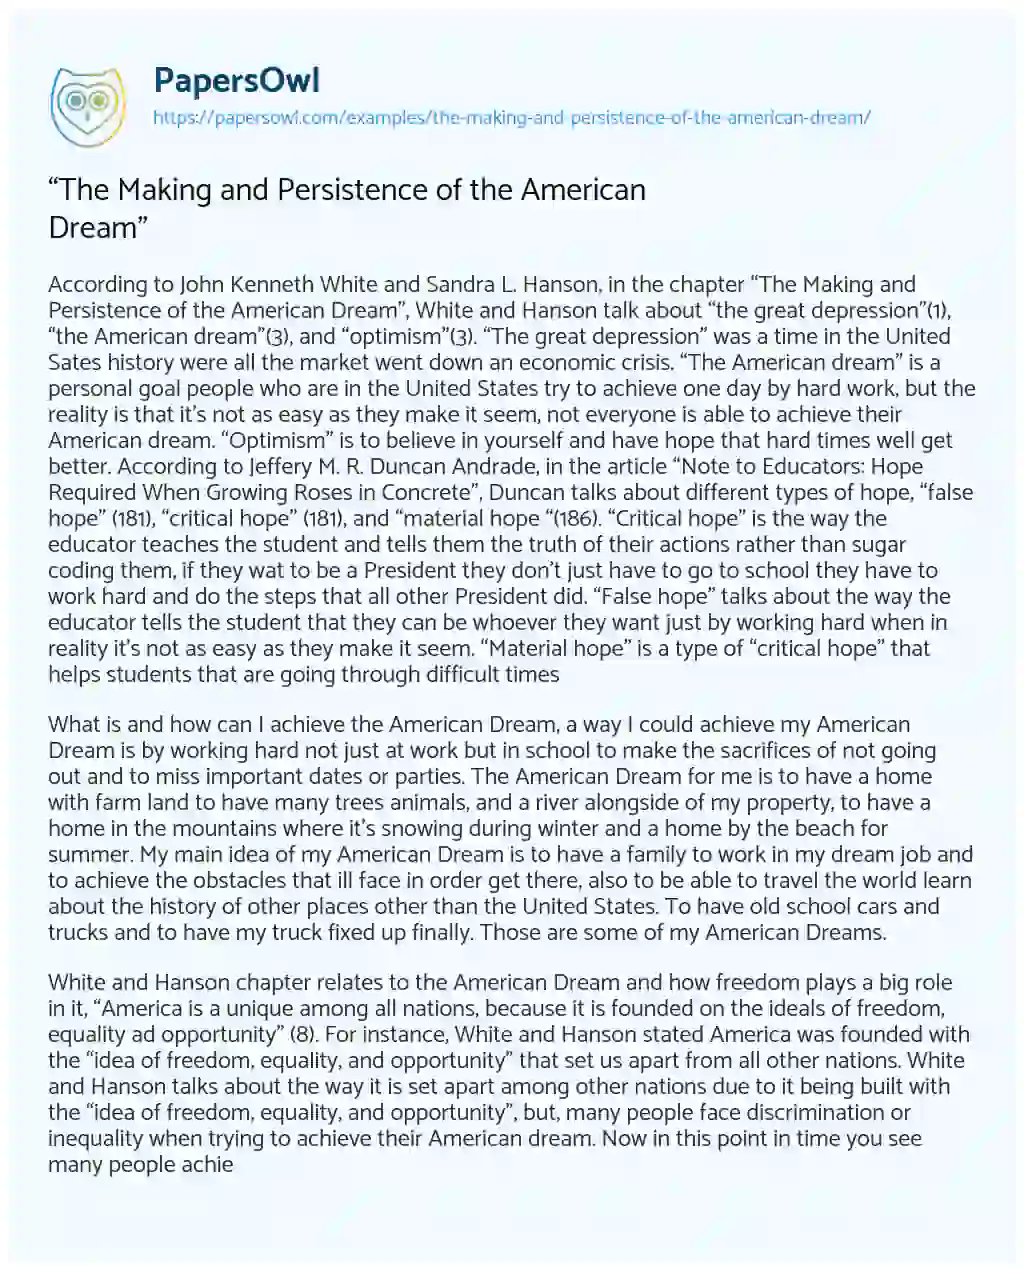 Essay on “The Making and Persistence of the American Dream”